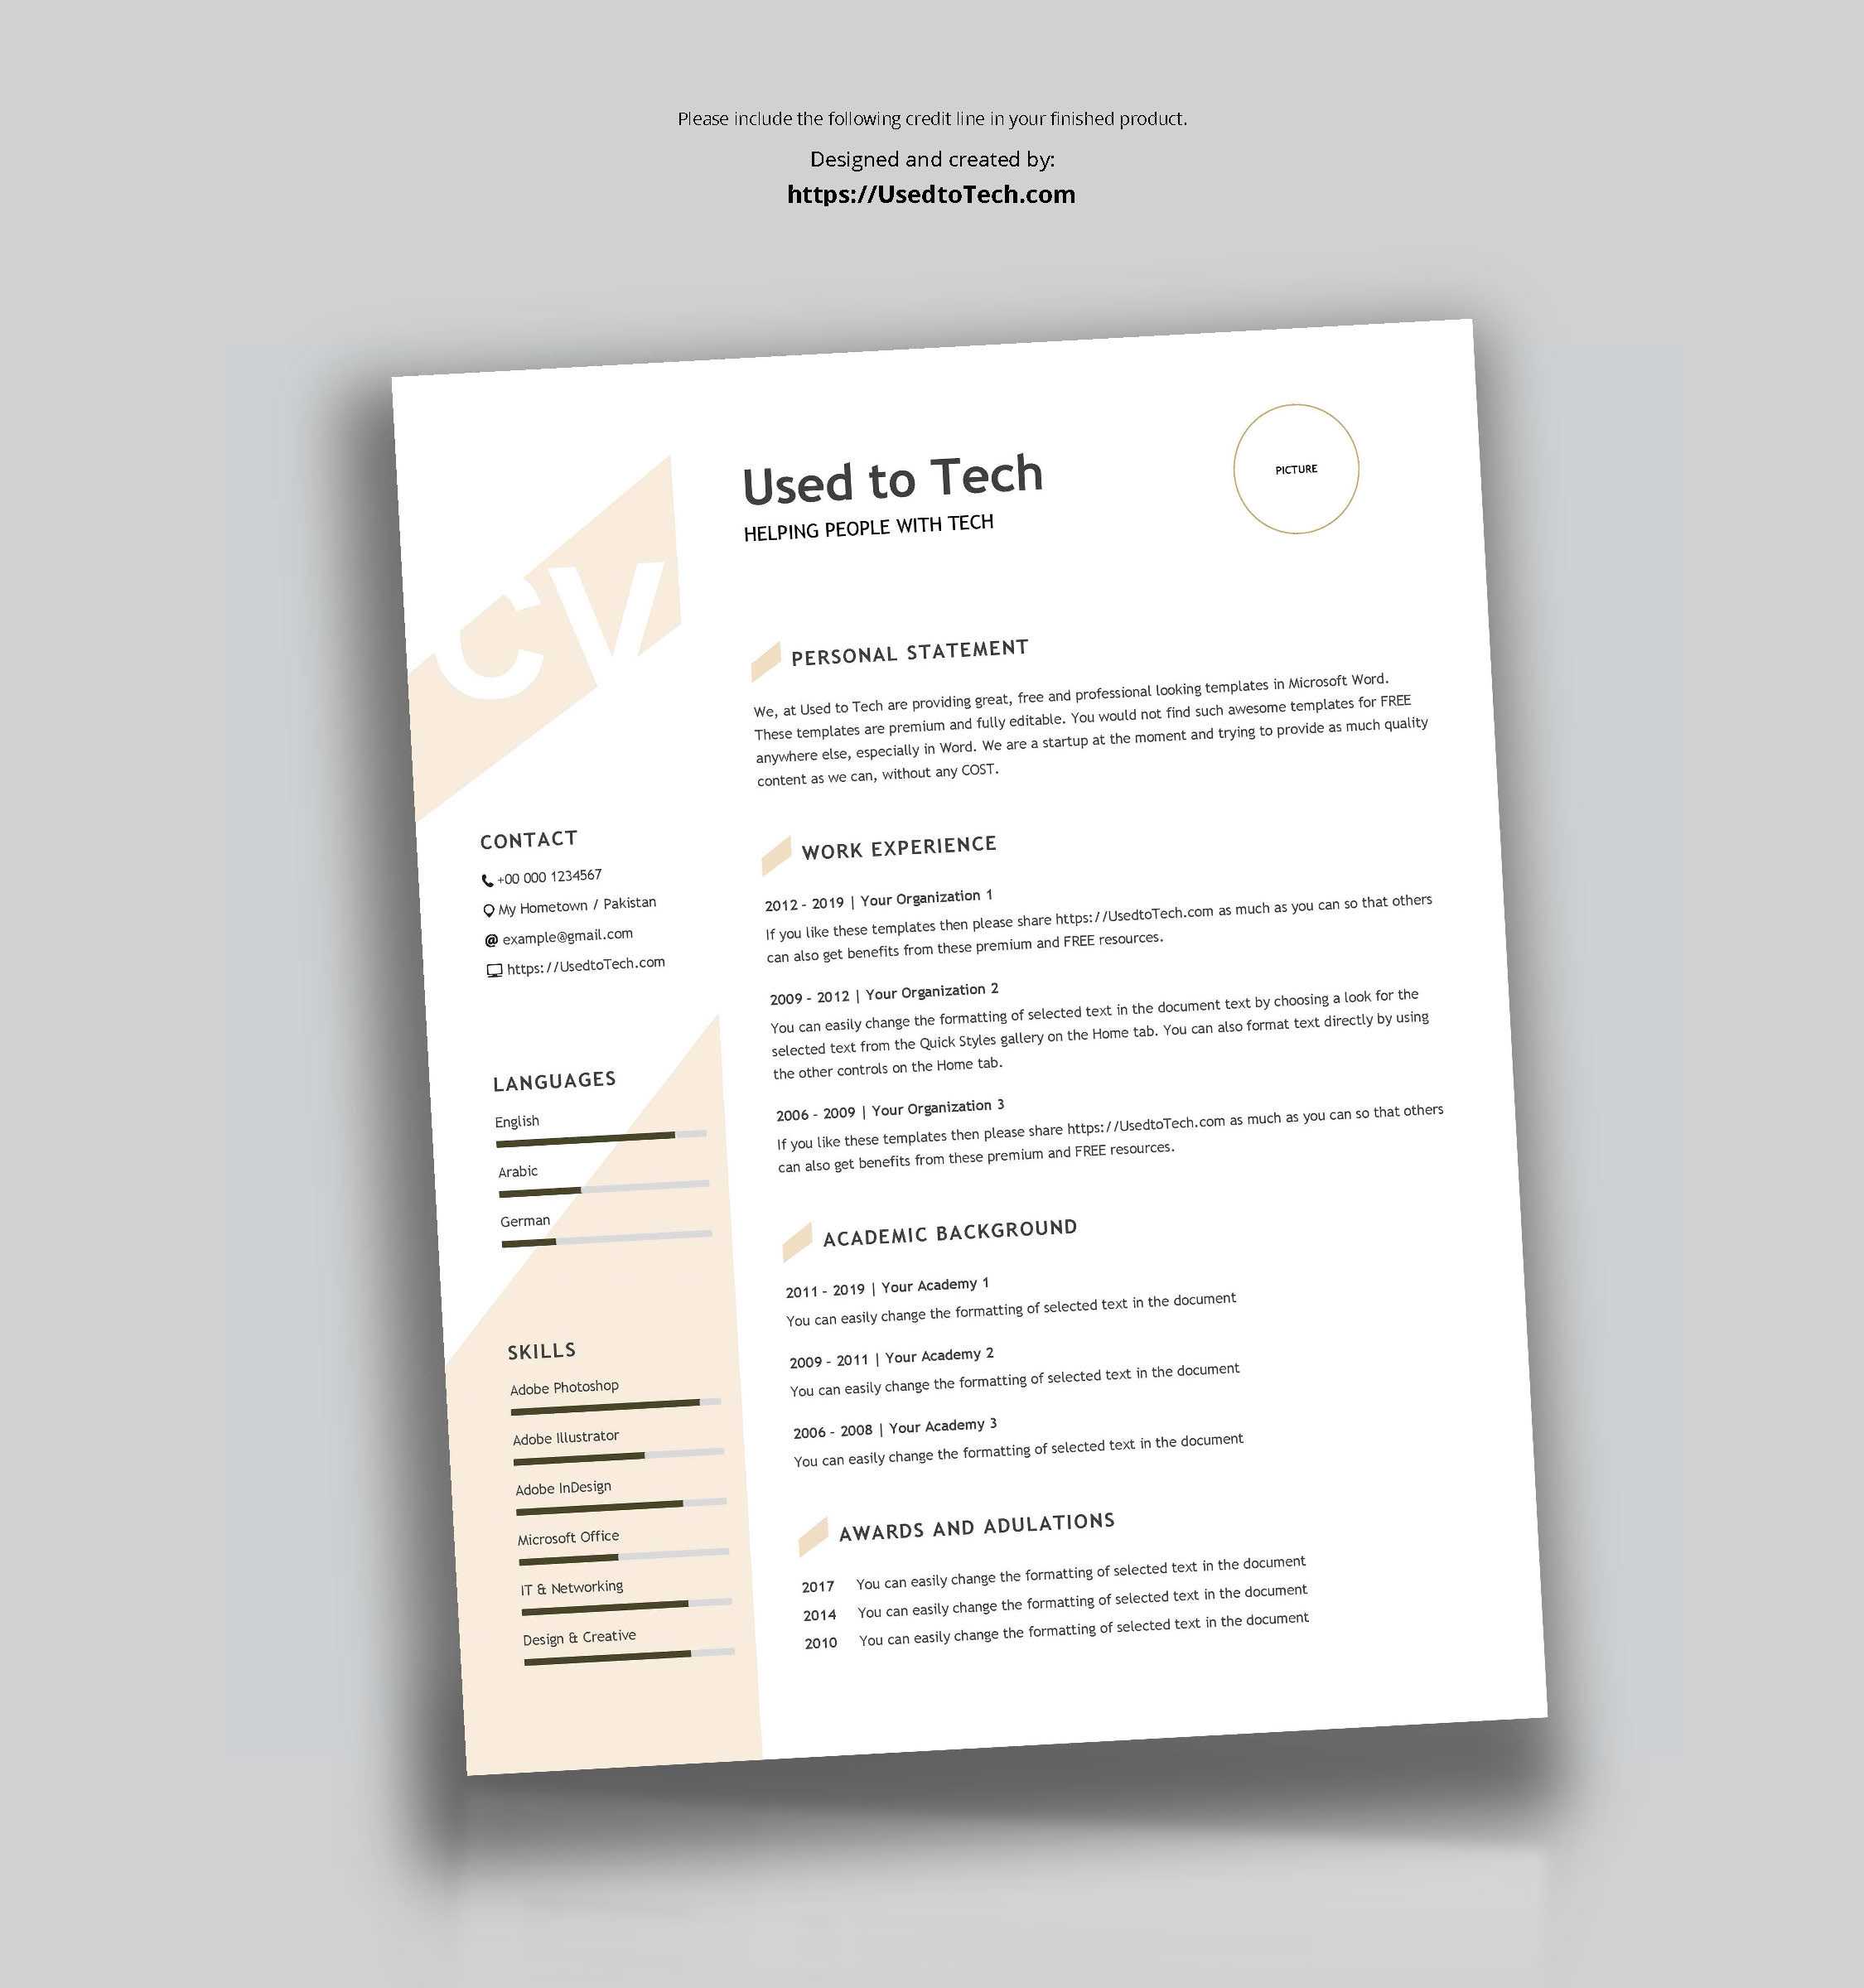 Modern Resume Template In Word Free - Used To Tech Intended For How To Find A Resume Template On Word